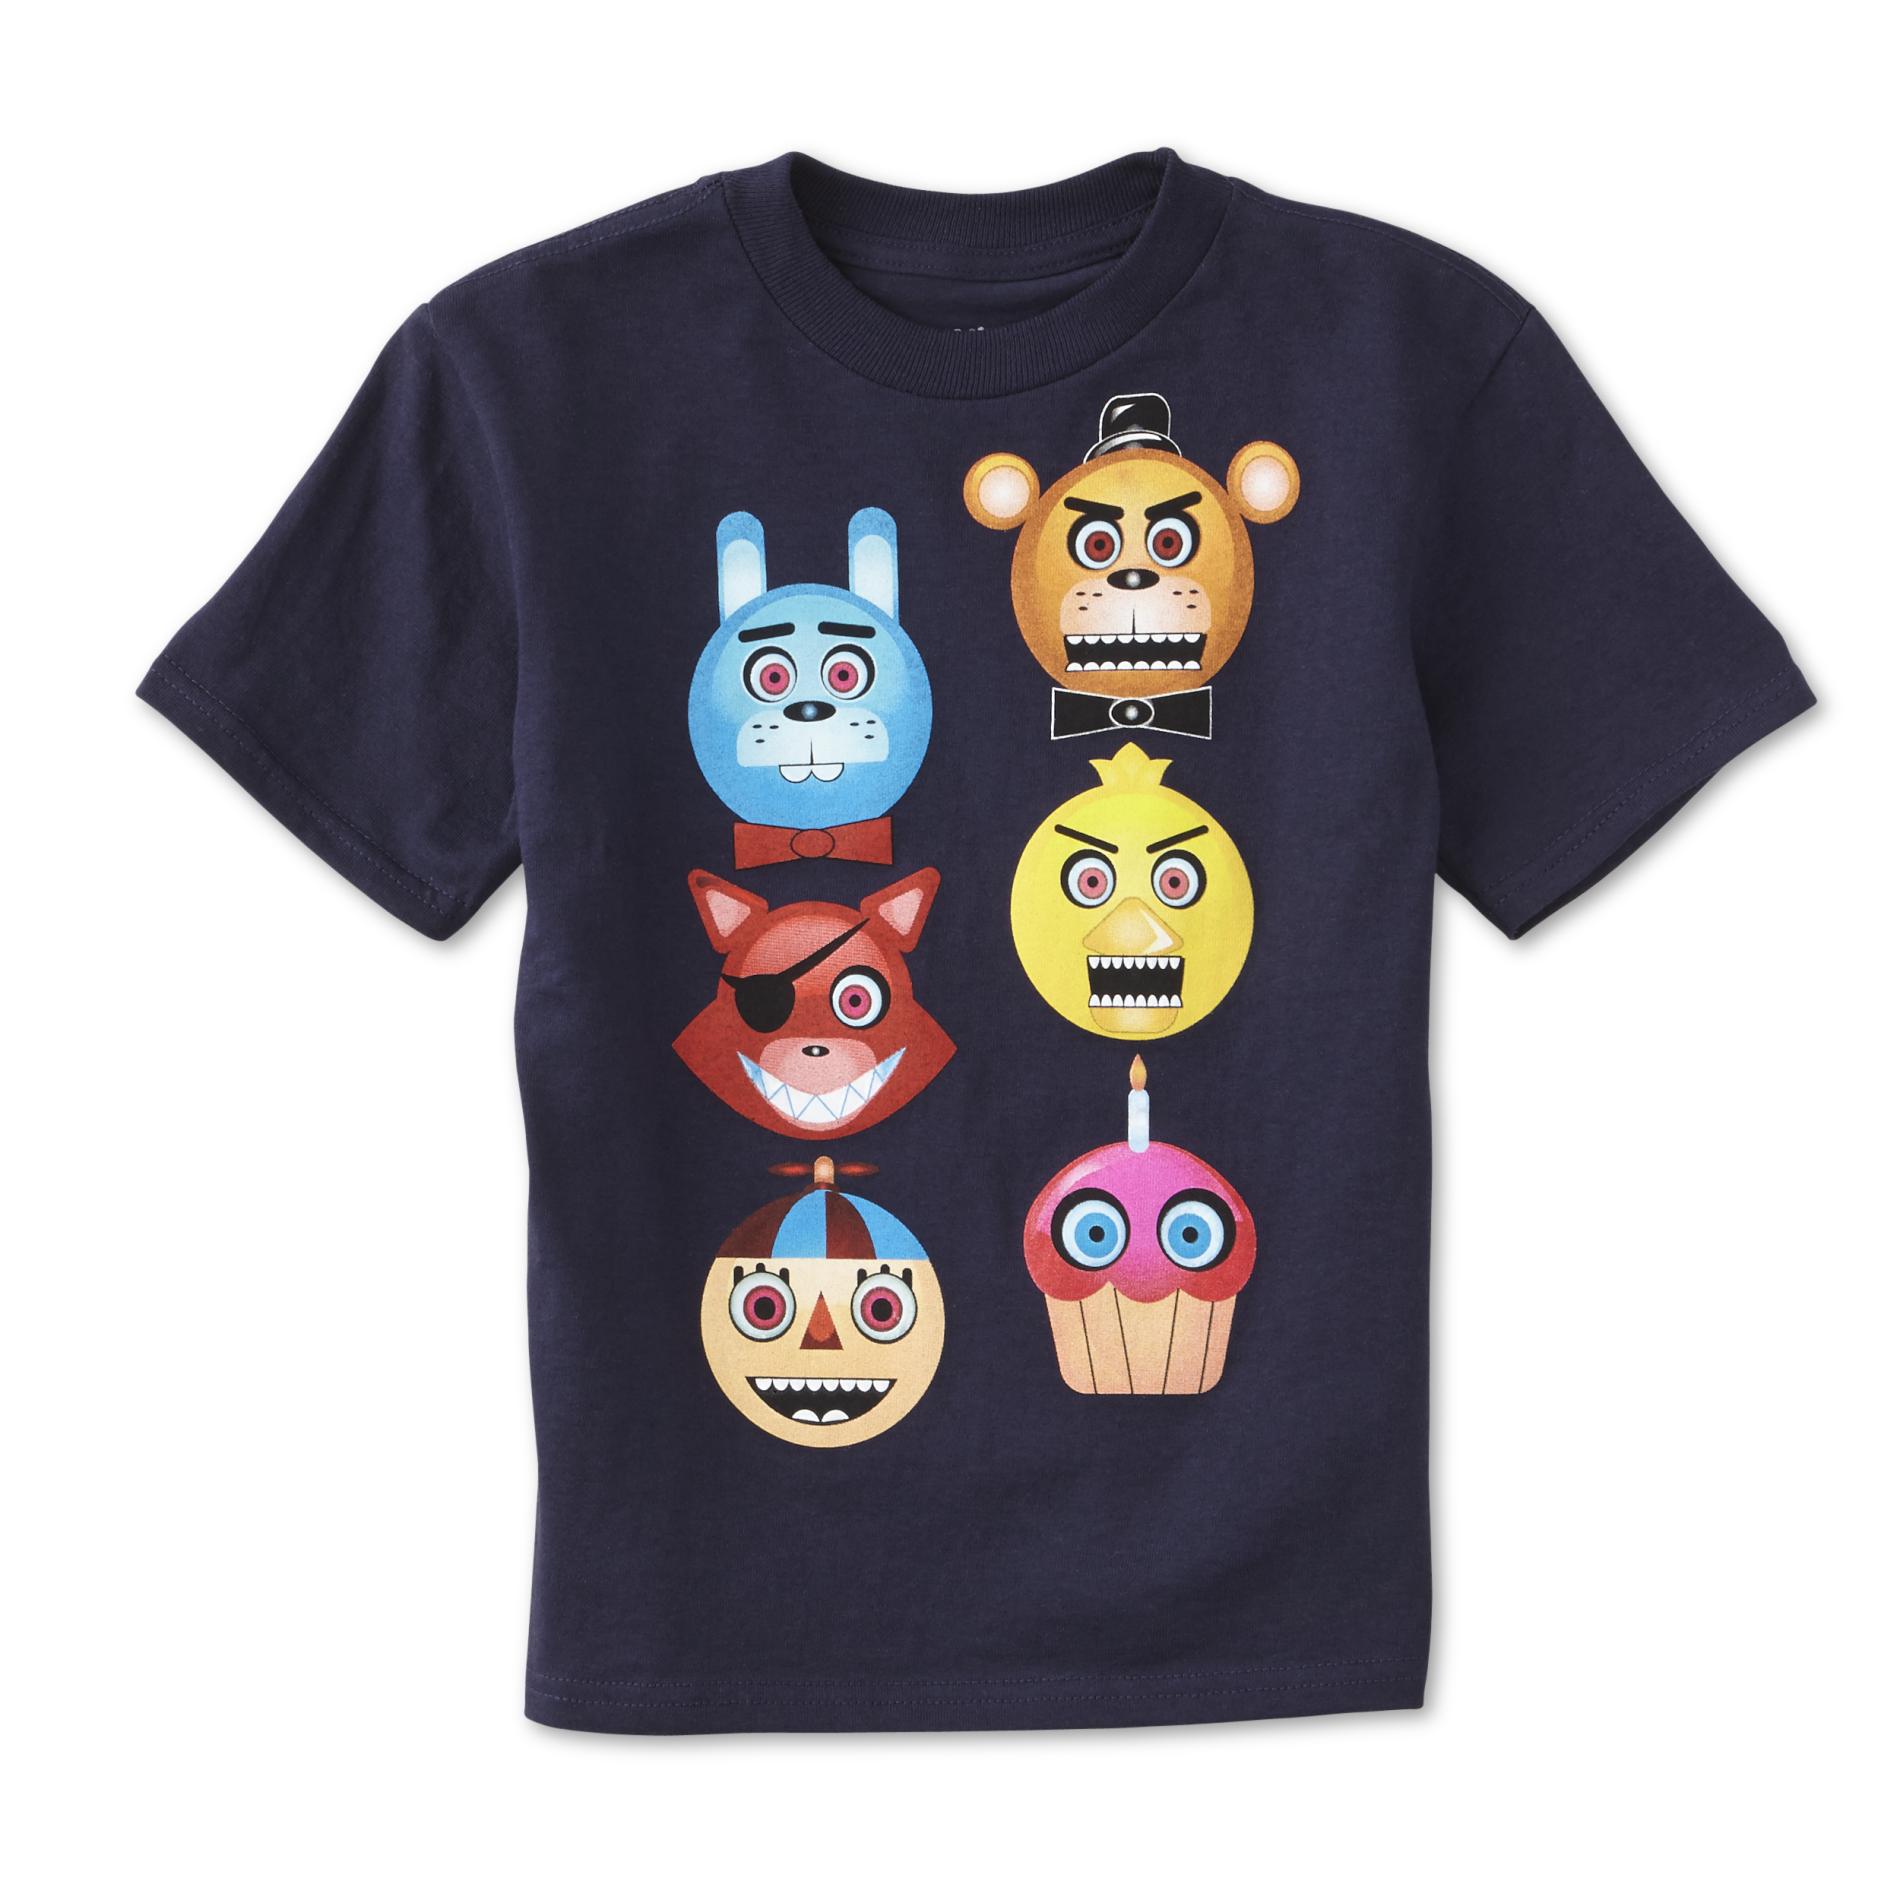 Five Nights at Freddy's Boys' Graphic T-Shirt